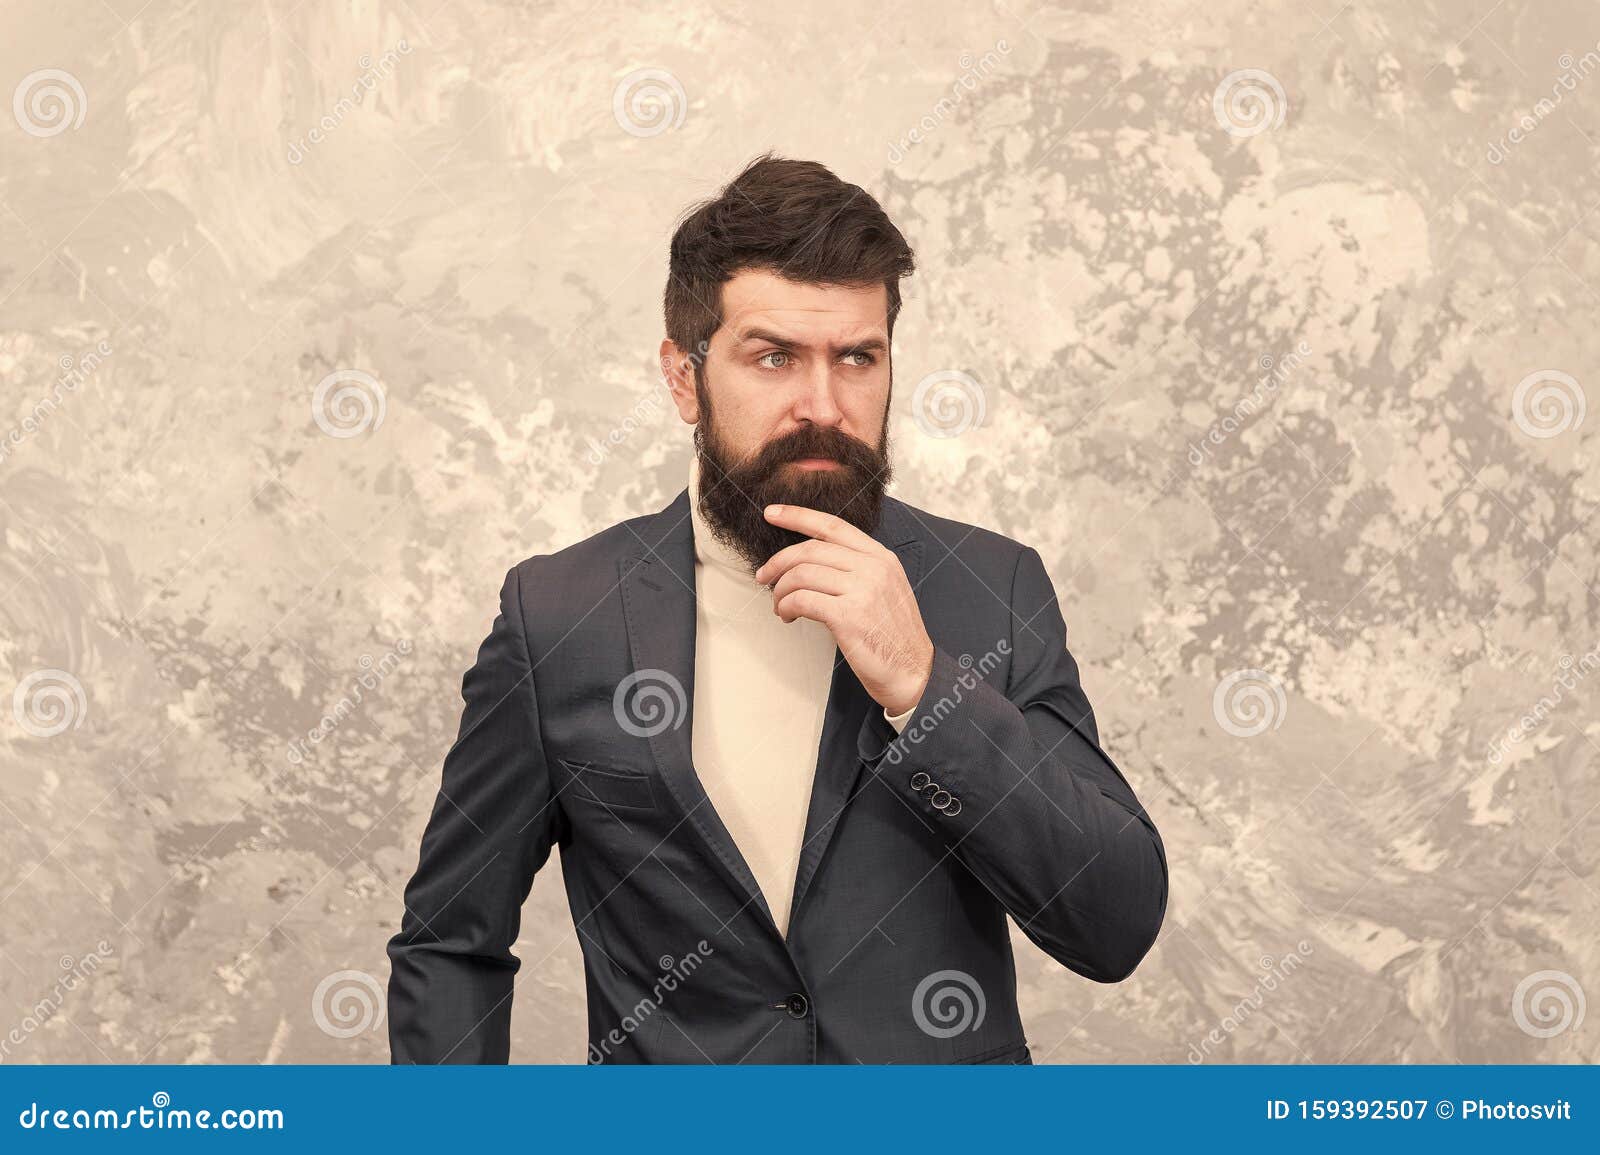 Guy Brutal Fashion Model. Business People Fashion Style. Formal Clothes for  Office. Confident and Successful Stock Image - Image of people, formal:  159392507